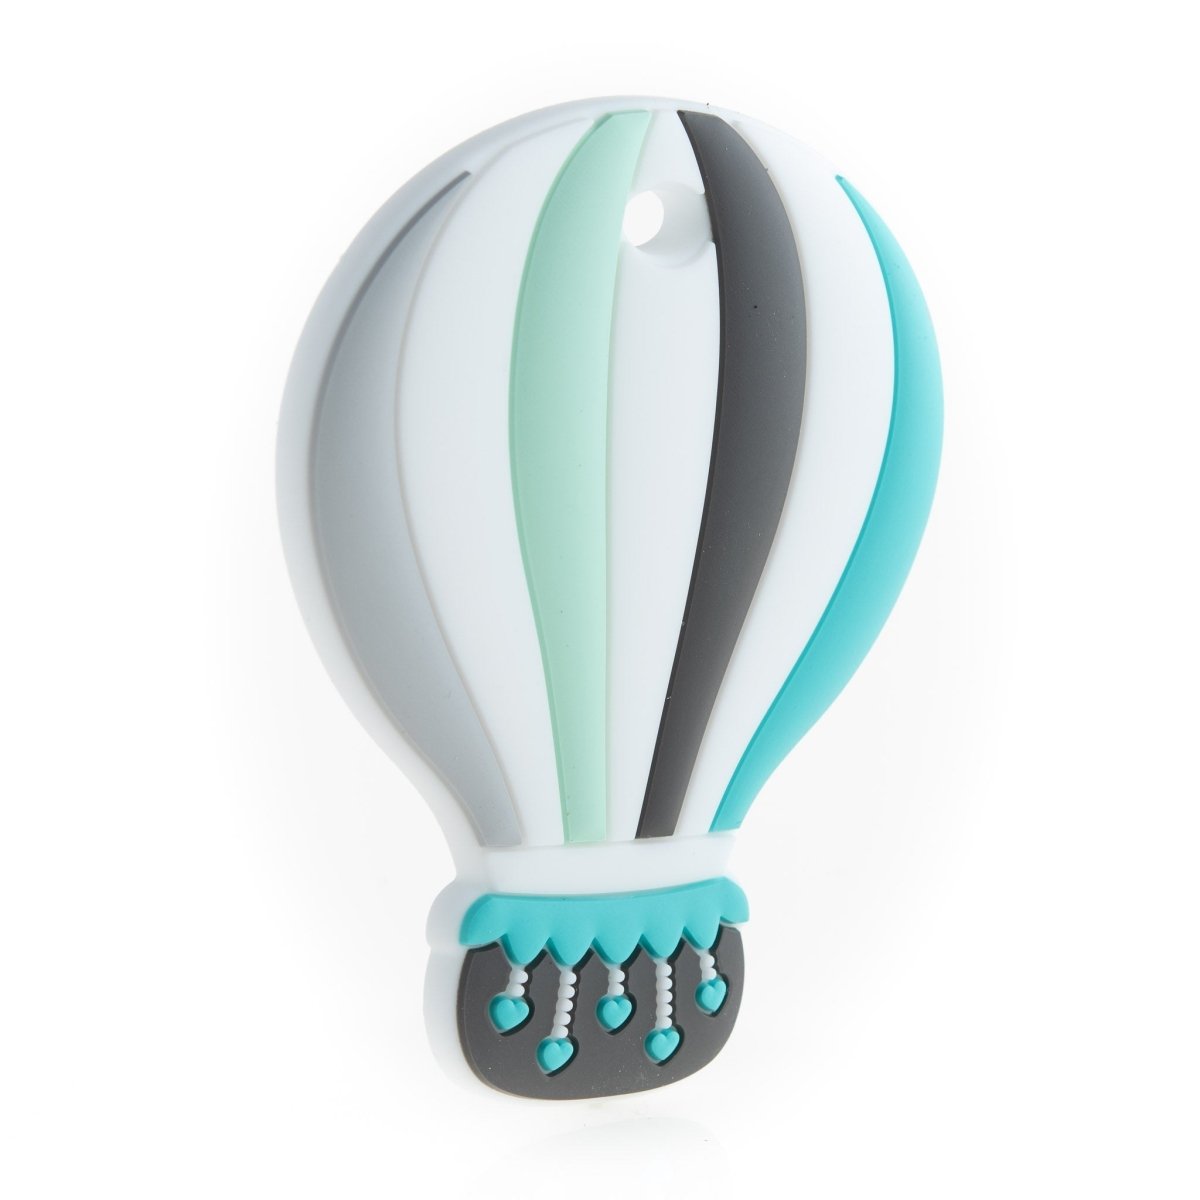 Silicone Teethers and Pendants Colorful Hot Air Balloons Storm from Cara & Co Craft Supply